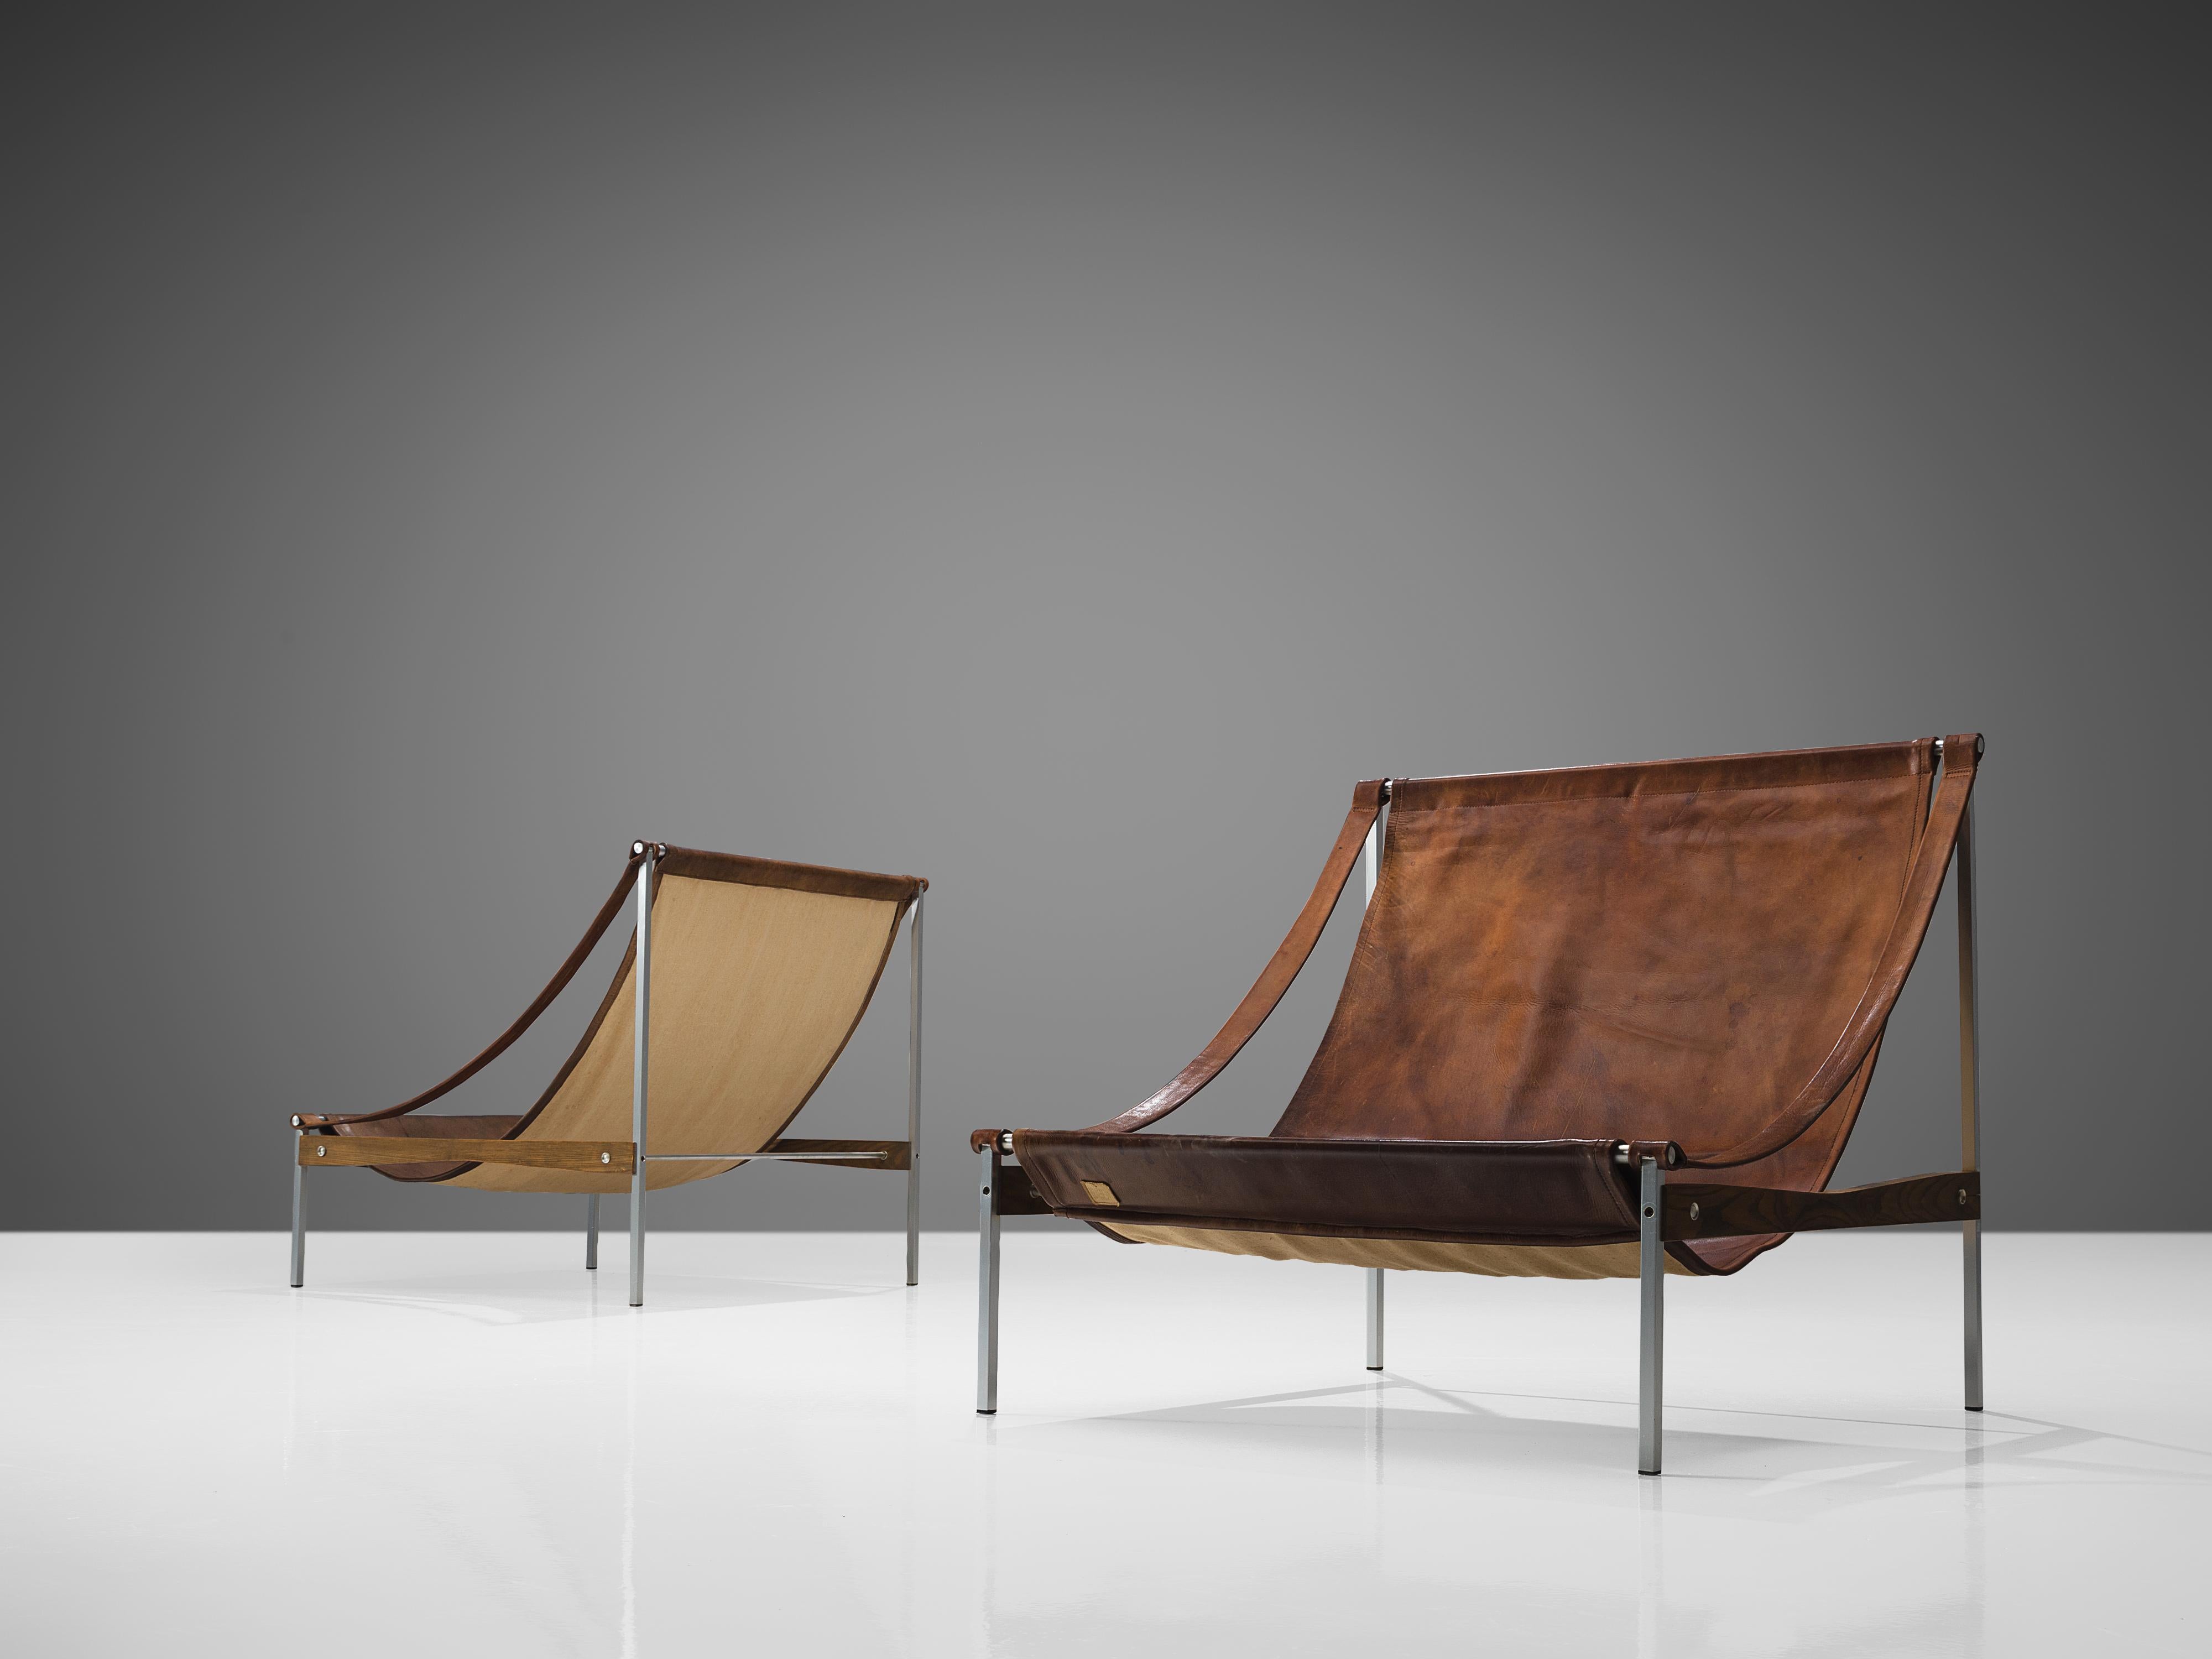 Danish Rare Pair of Stig Poulsson 'Bequem' Lounge Chairs in Cognac Leather